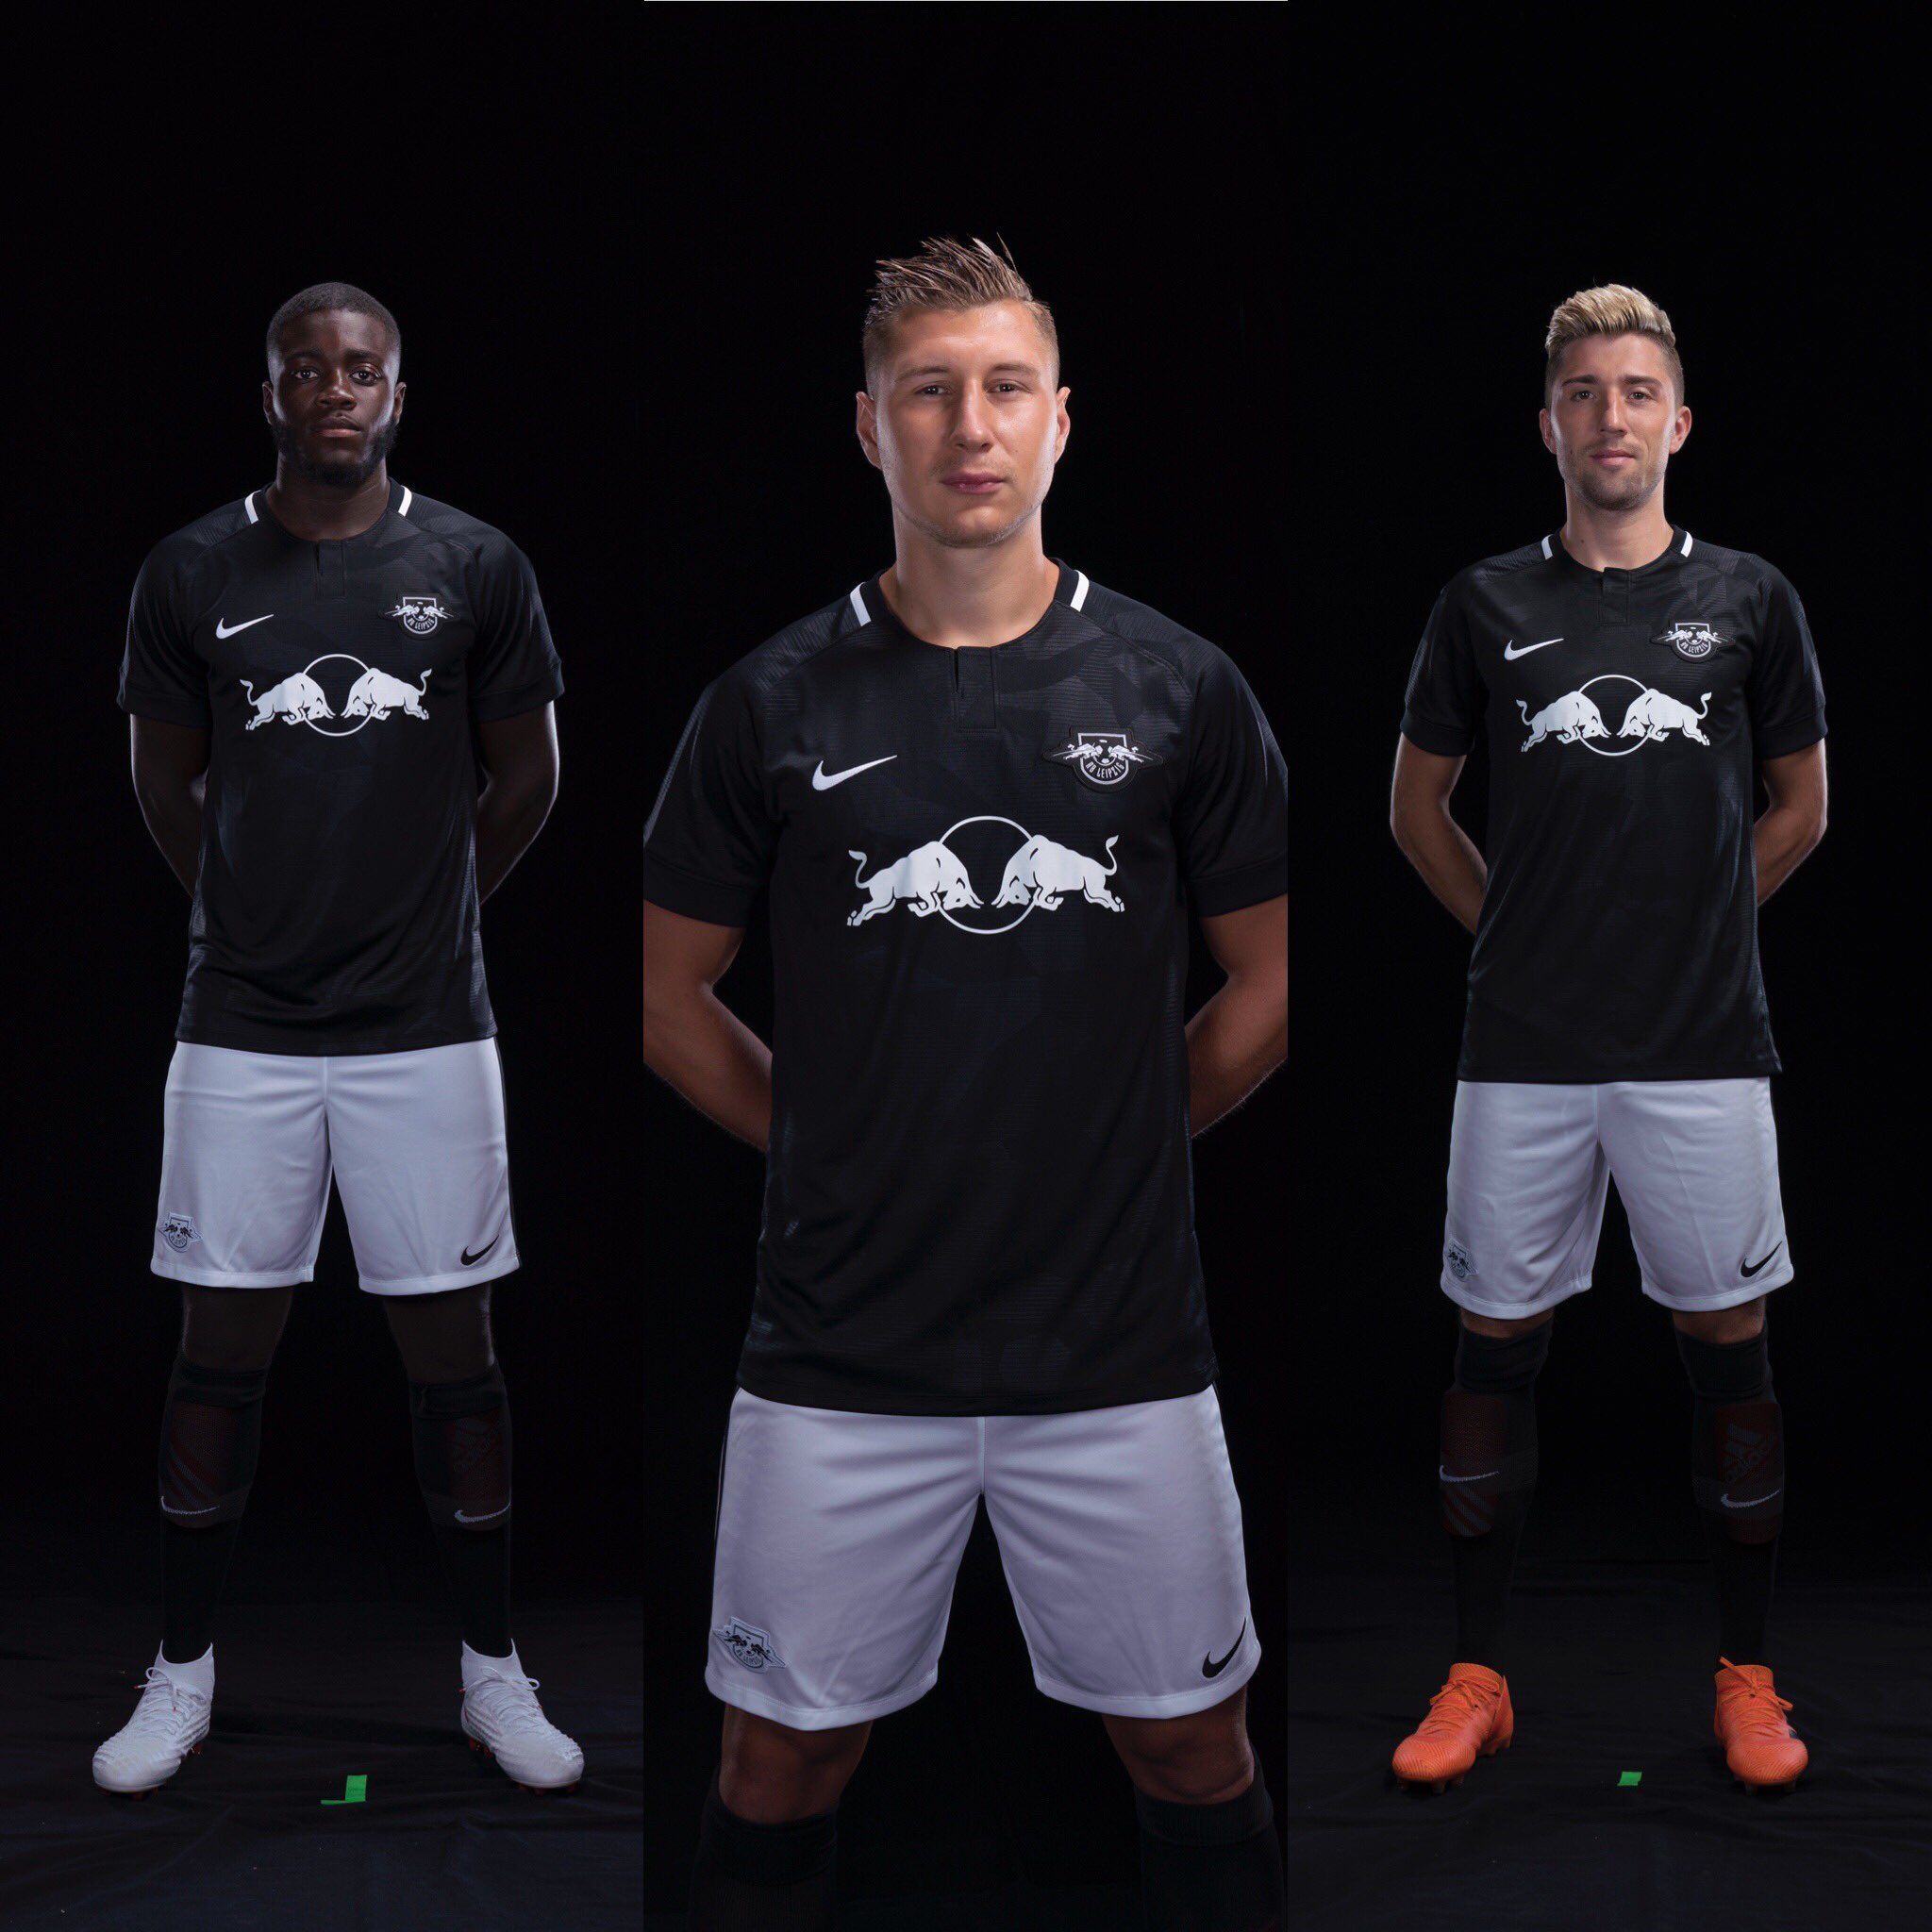 RB Leipzig English on Twitter: "⚫️⚪️ Introducing our new third for the 2018/19 season, available from on our online 💻 https://t.co/ipeL47o7ks @nikefootball https://t.co/KPhmb7bfoC" / Twitter